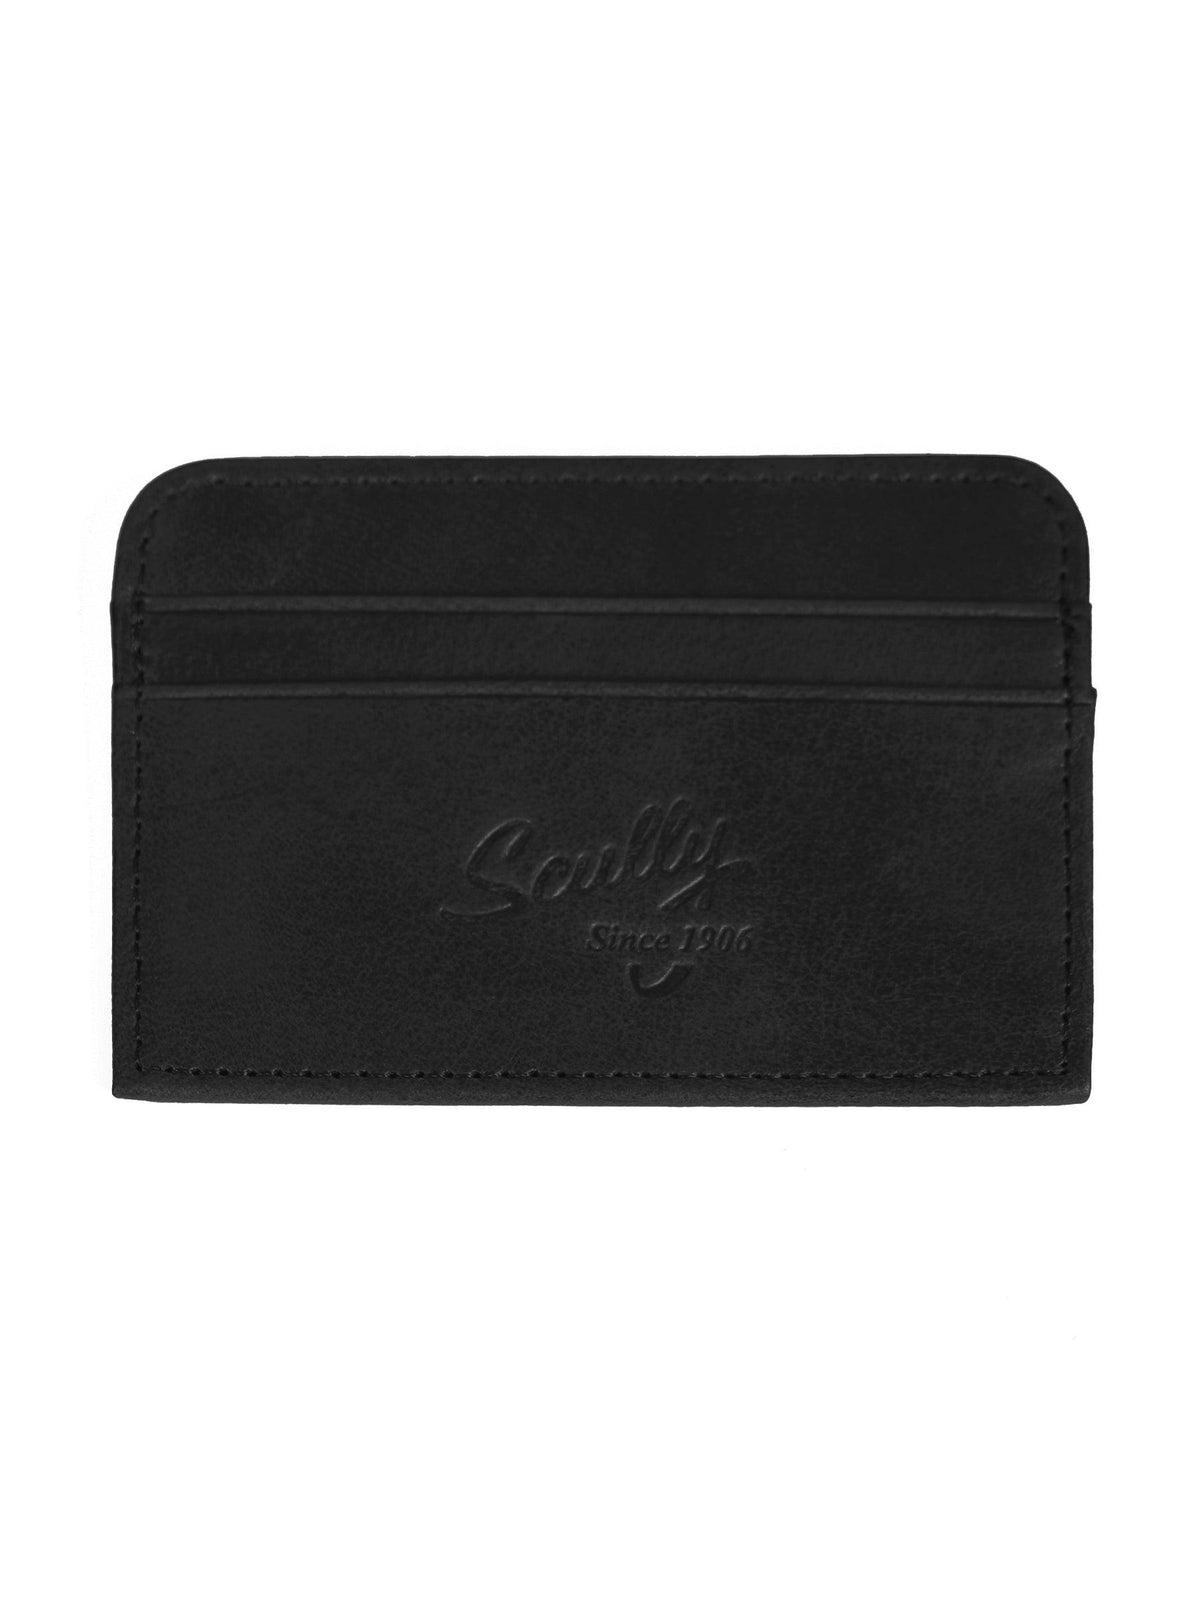 Scully Leather Harness Ranger Leather Black Card Case - Flyclothing LLC